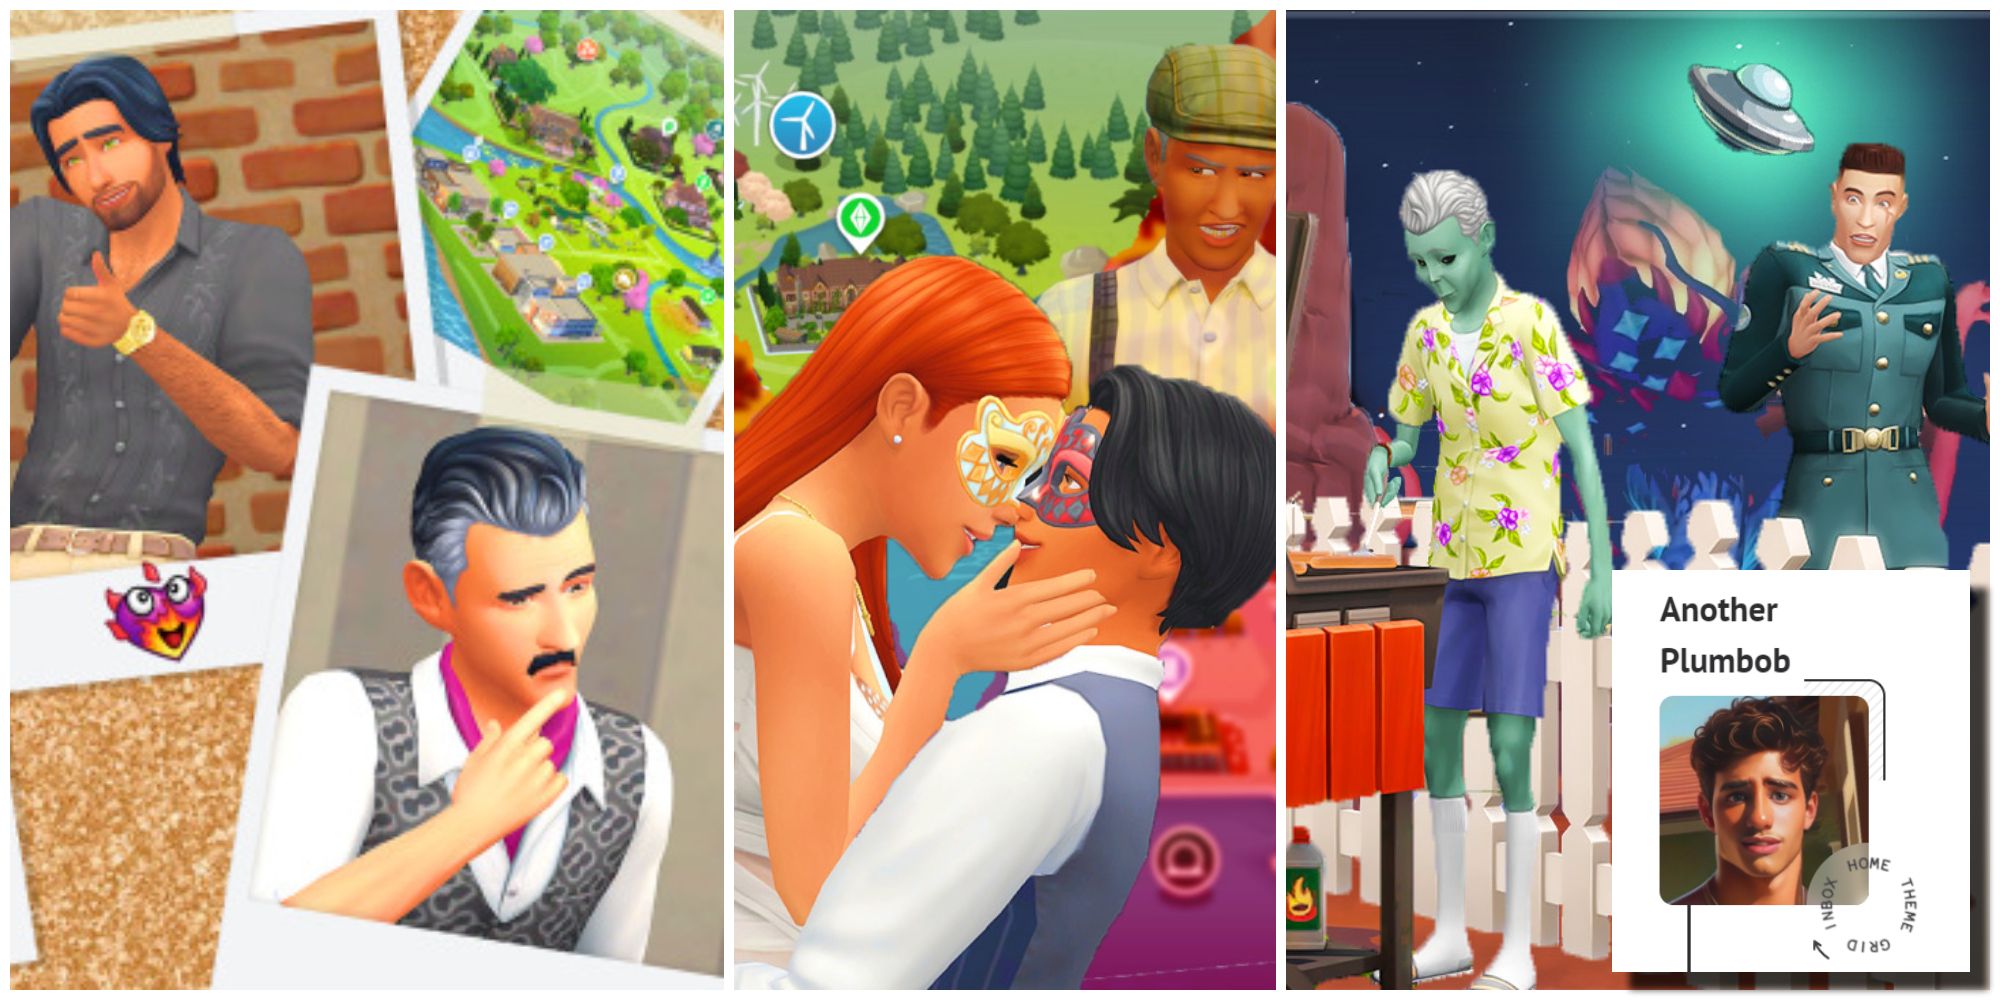 Uberhood The Sims 2 File by Another Plumbob for The Sims 4